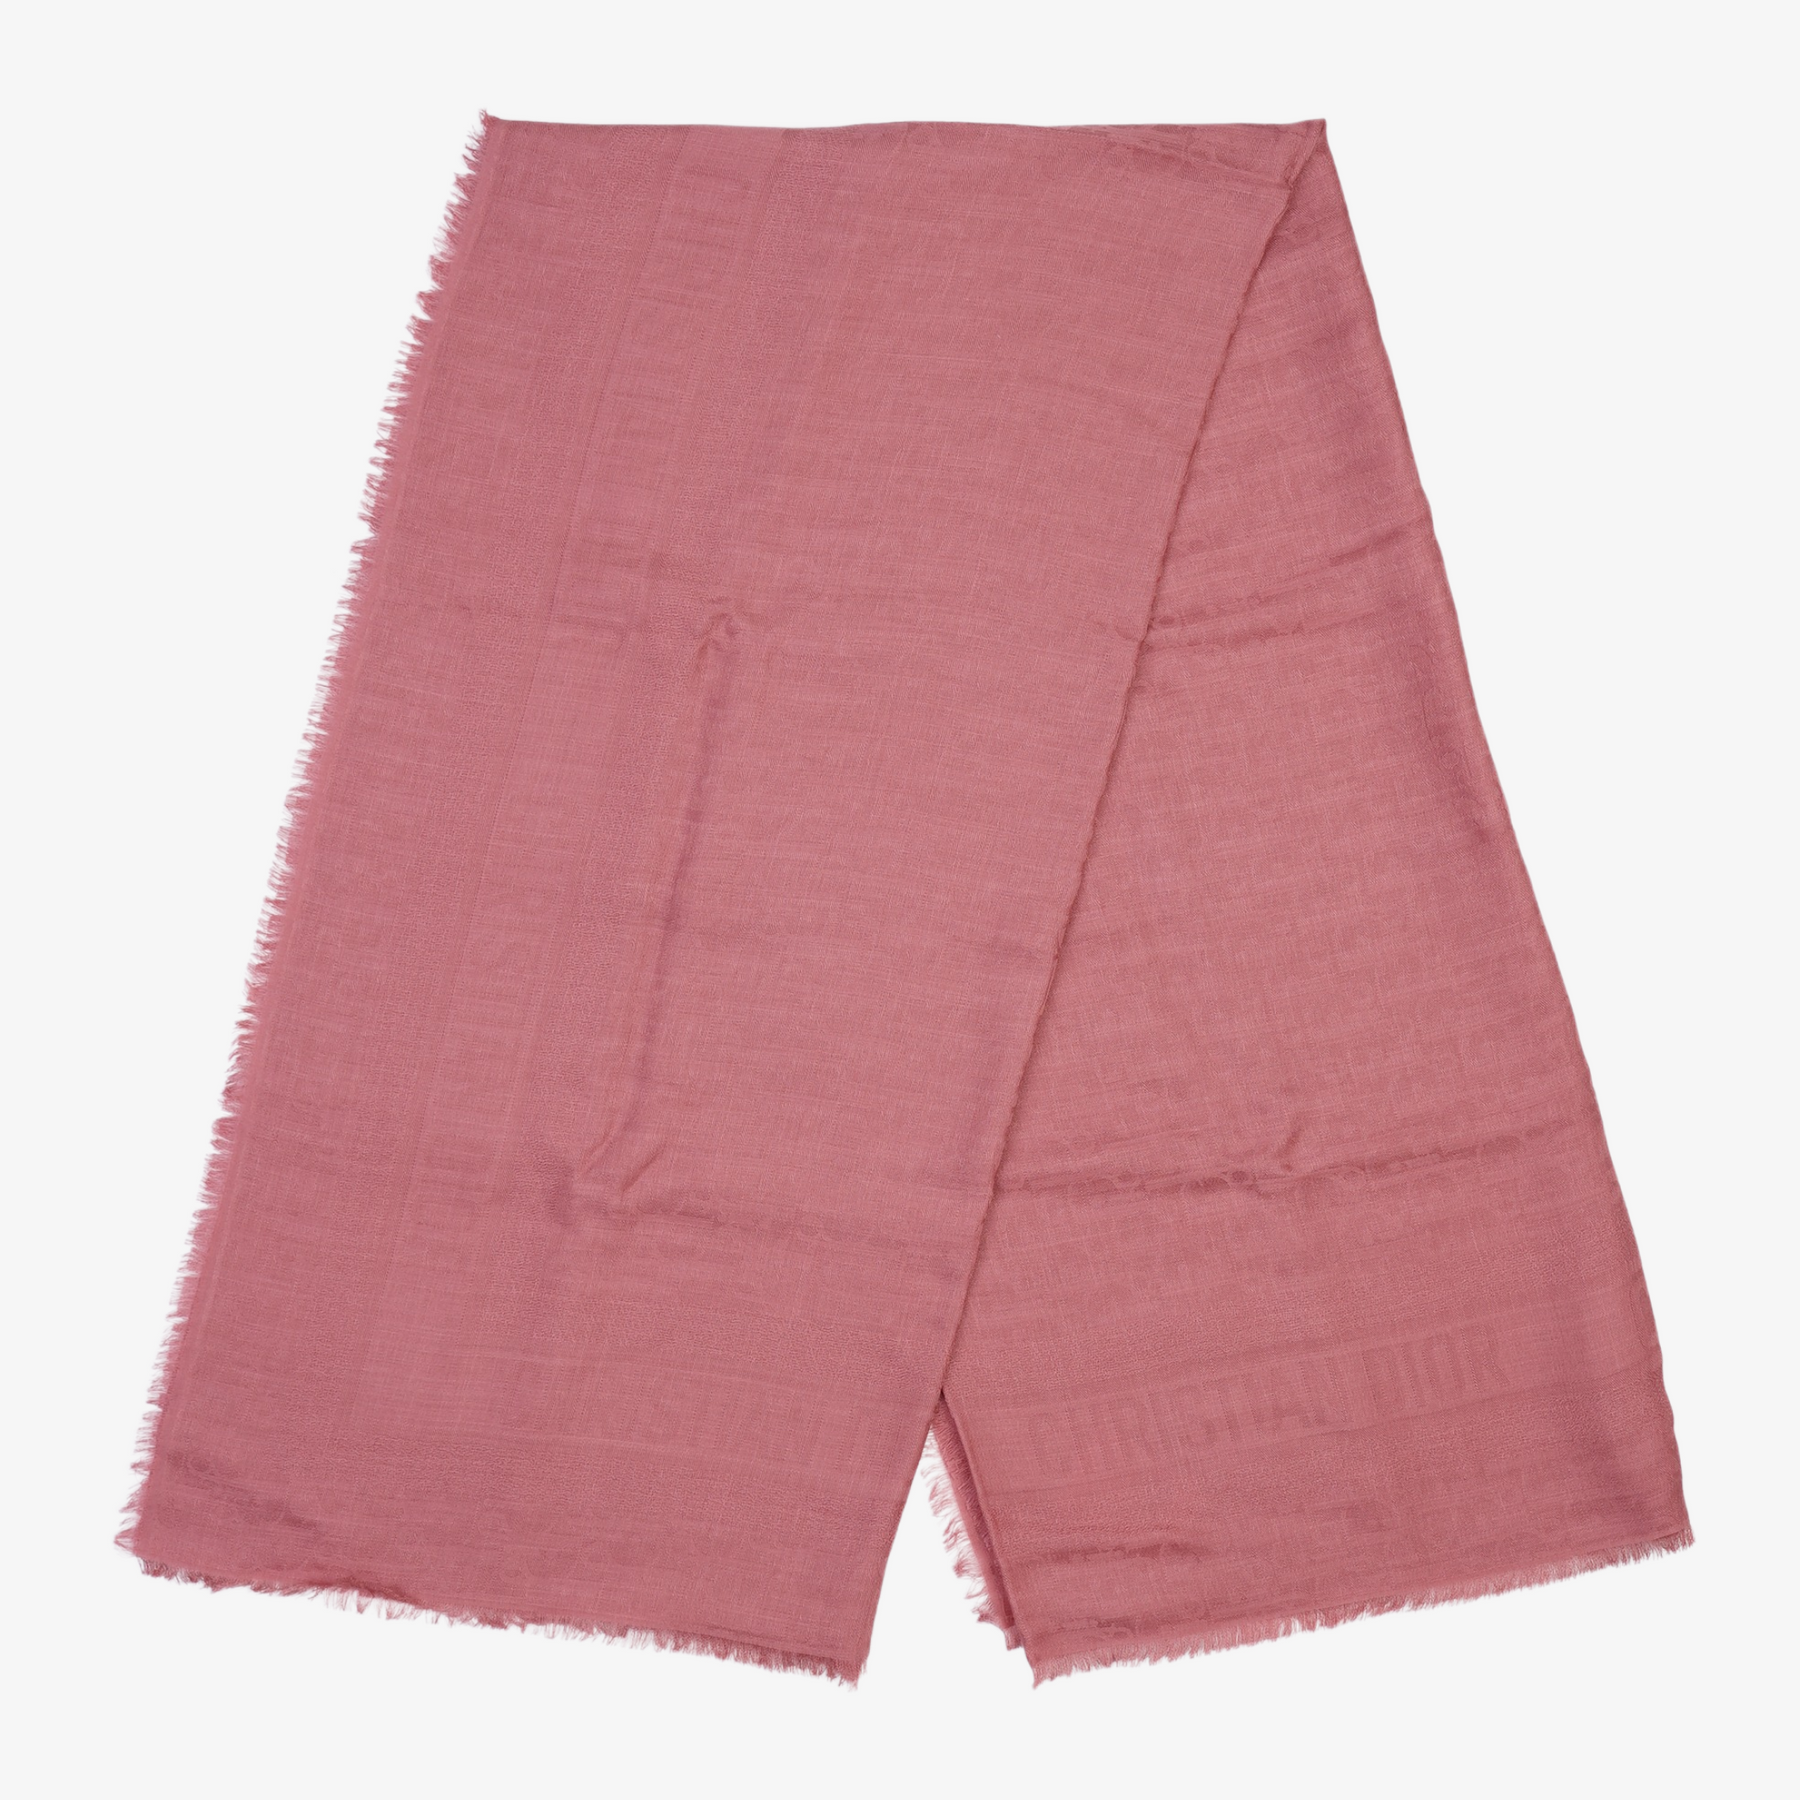 Dior Oblique Shawl Pink Wool, Silk and Cashmere